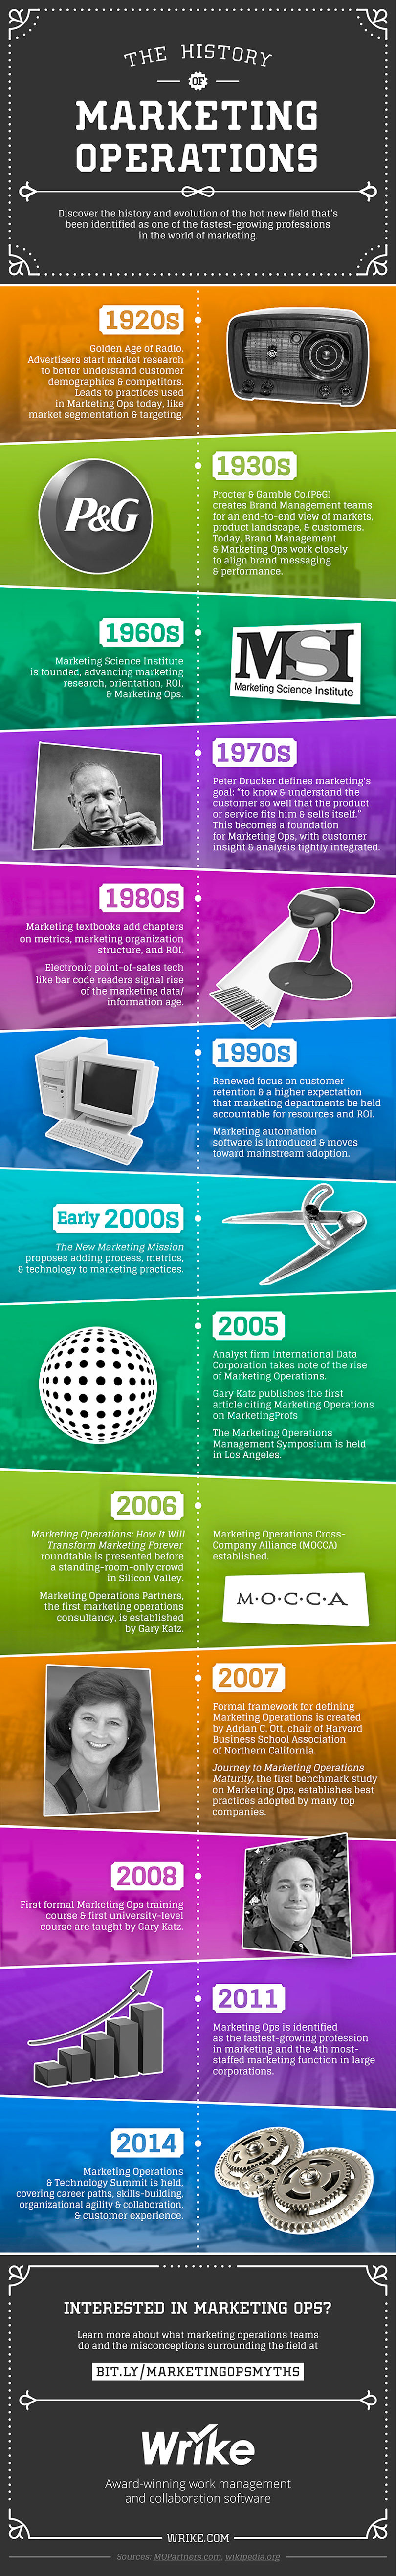 Marketing operations history - infographic